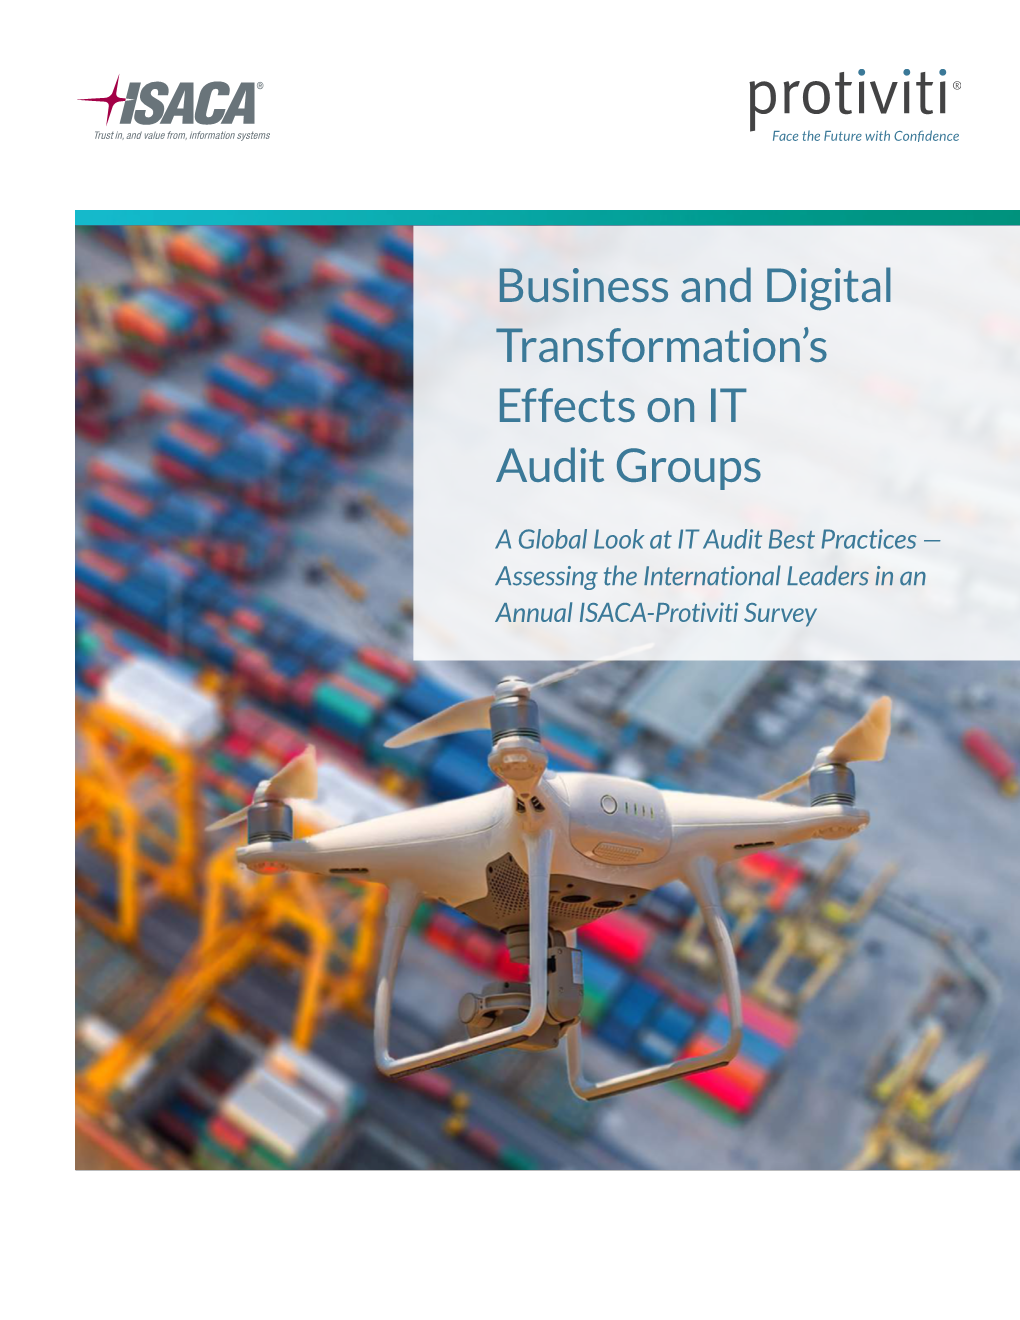 Business and Digital Transformation's Effects on IT Audit Groups